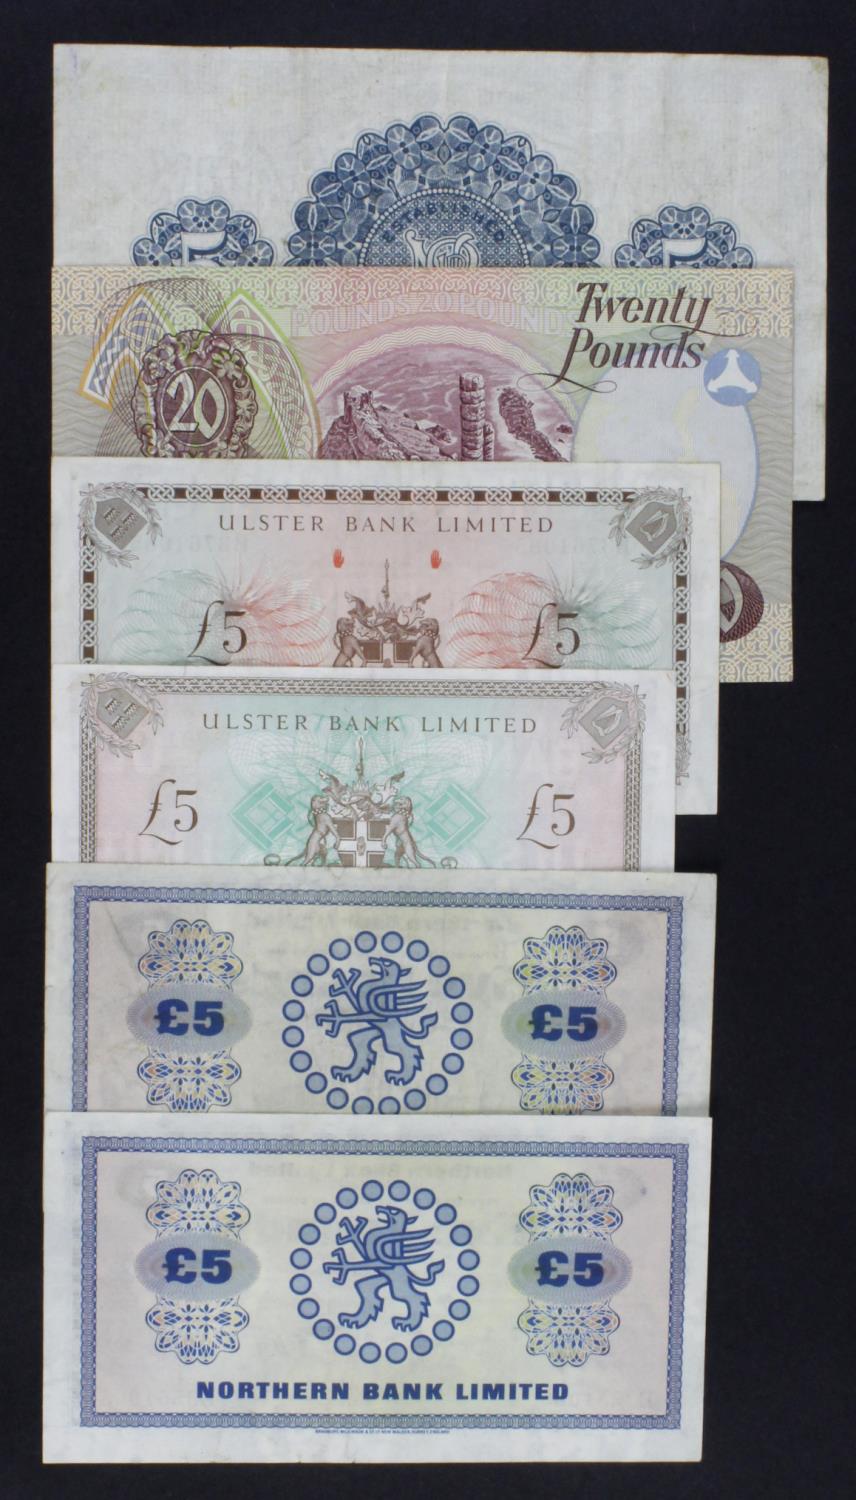 Northern Ireland (6), Northern Bank Limited 5 Pounds dated 1st November 1943, signed W.F. Scott, - Image 2 of 2